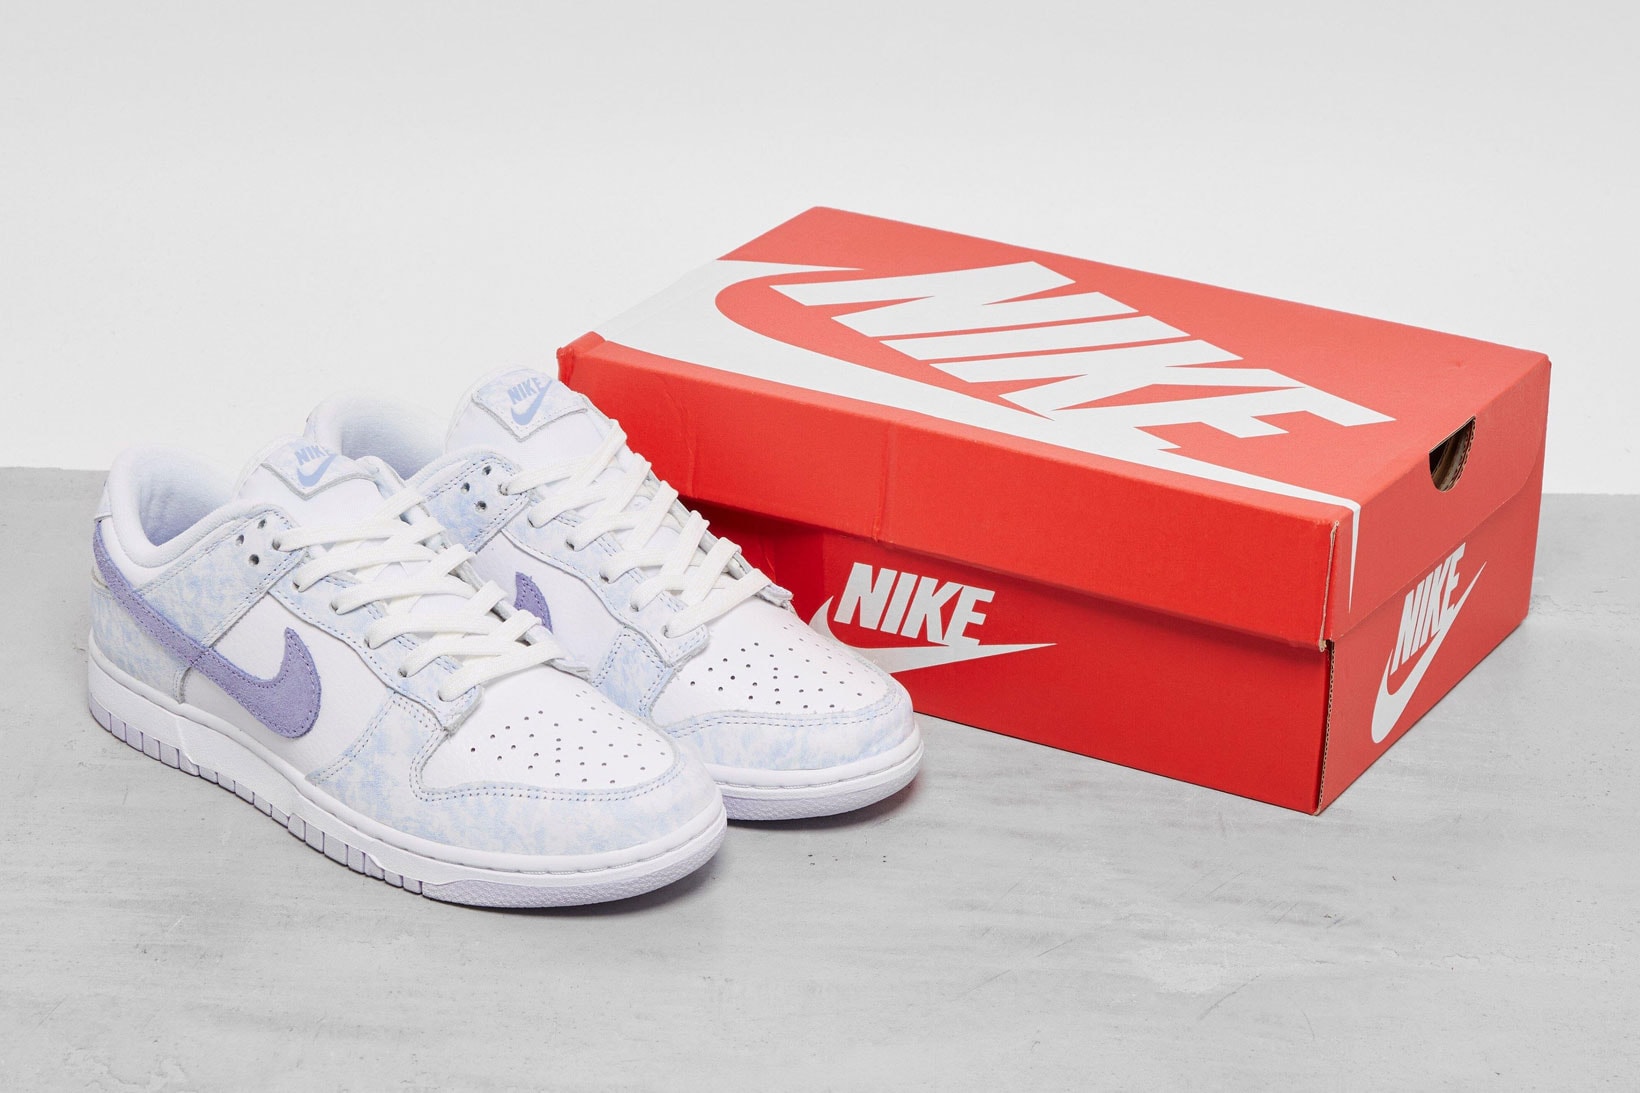 nike dunk low sneakers purple pulse details official look images box packaging